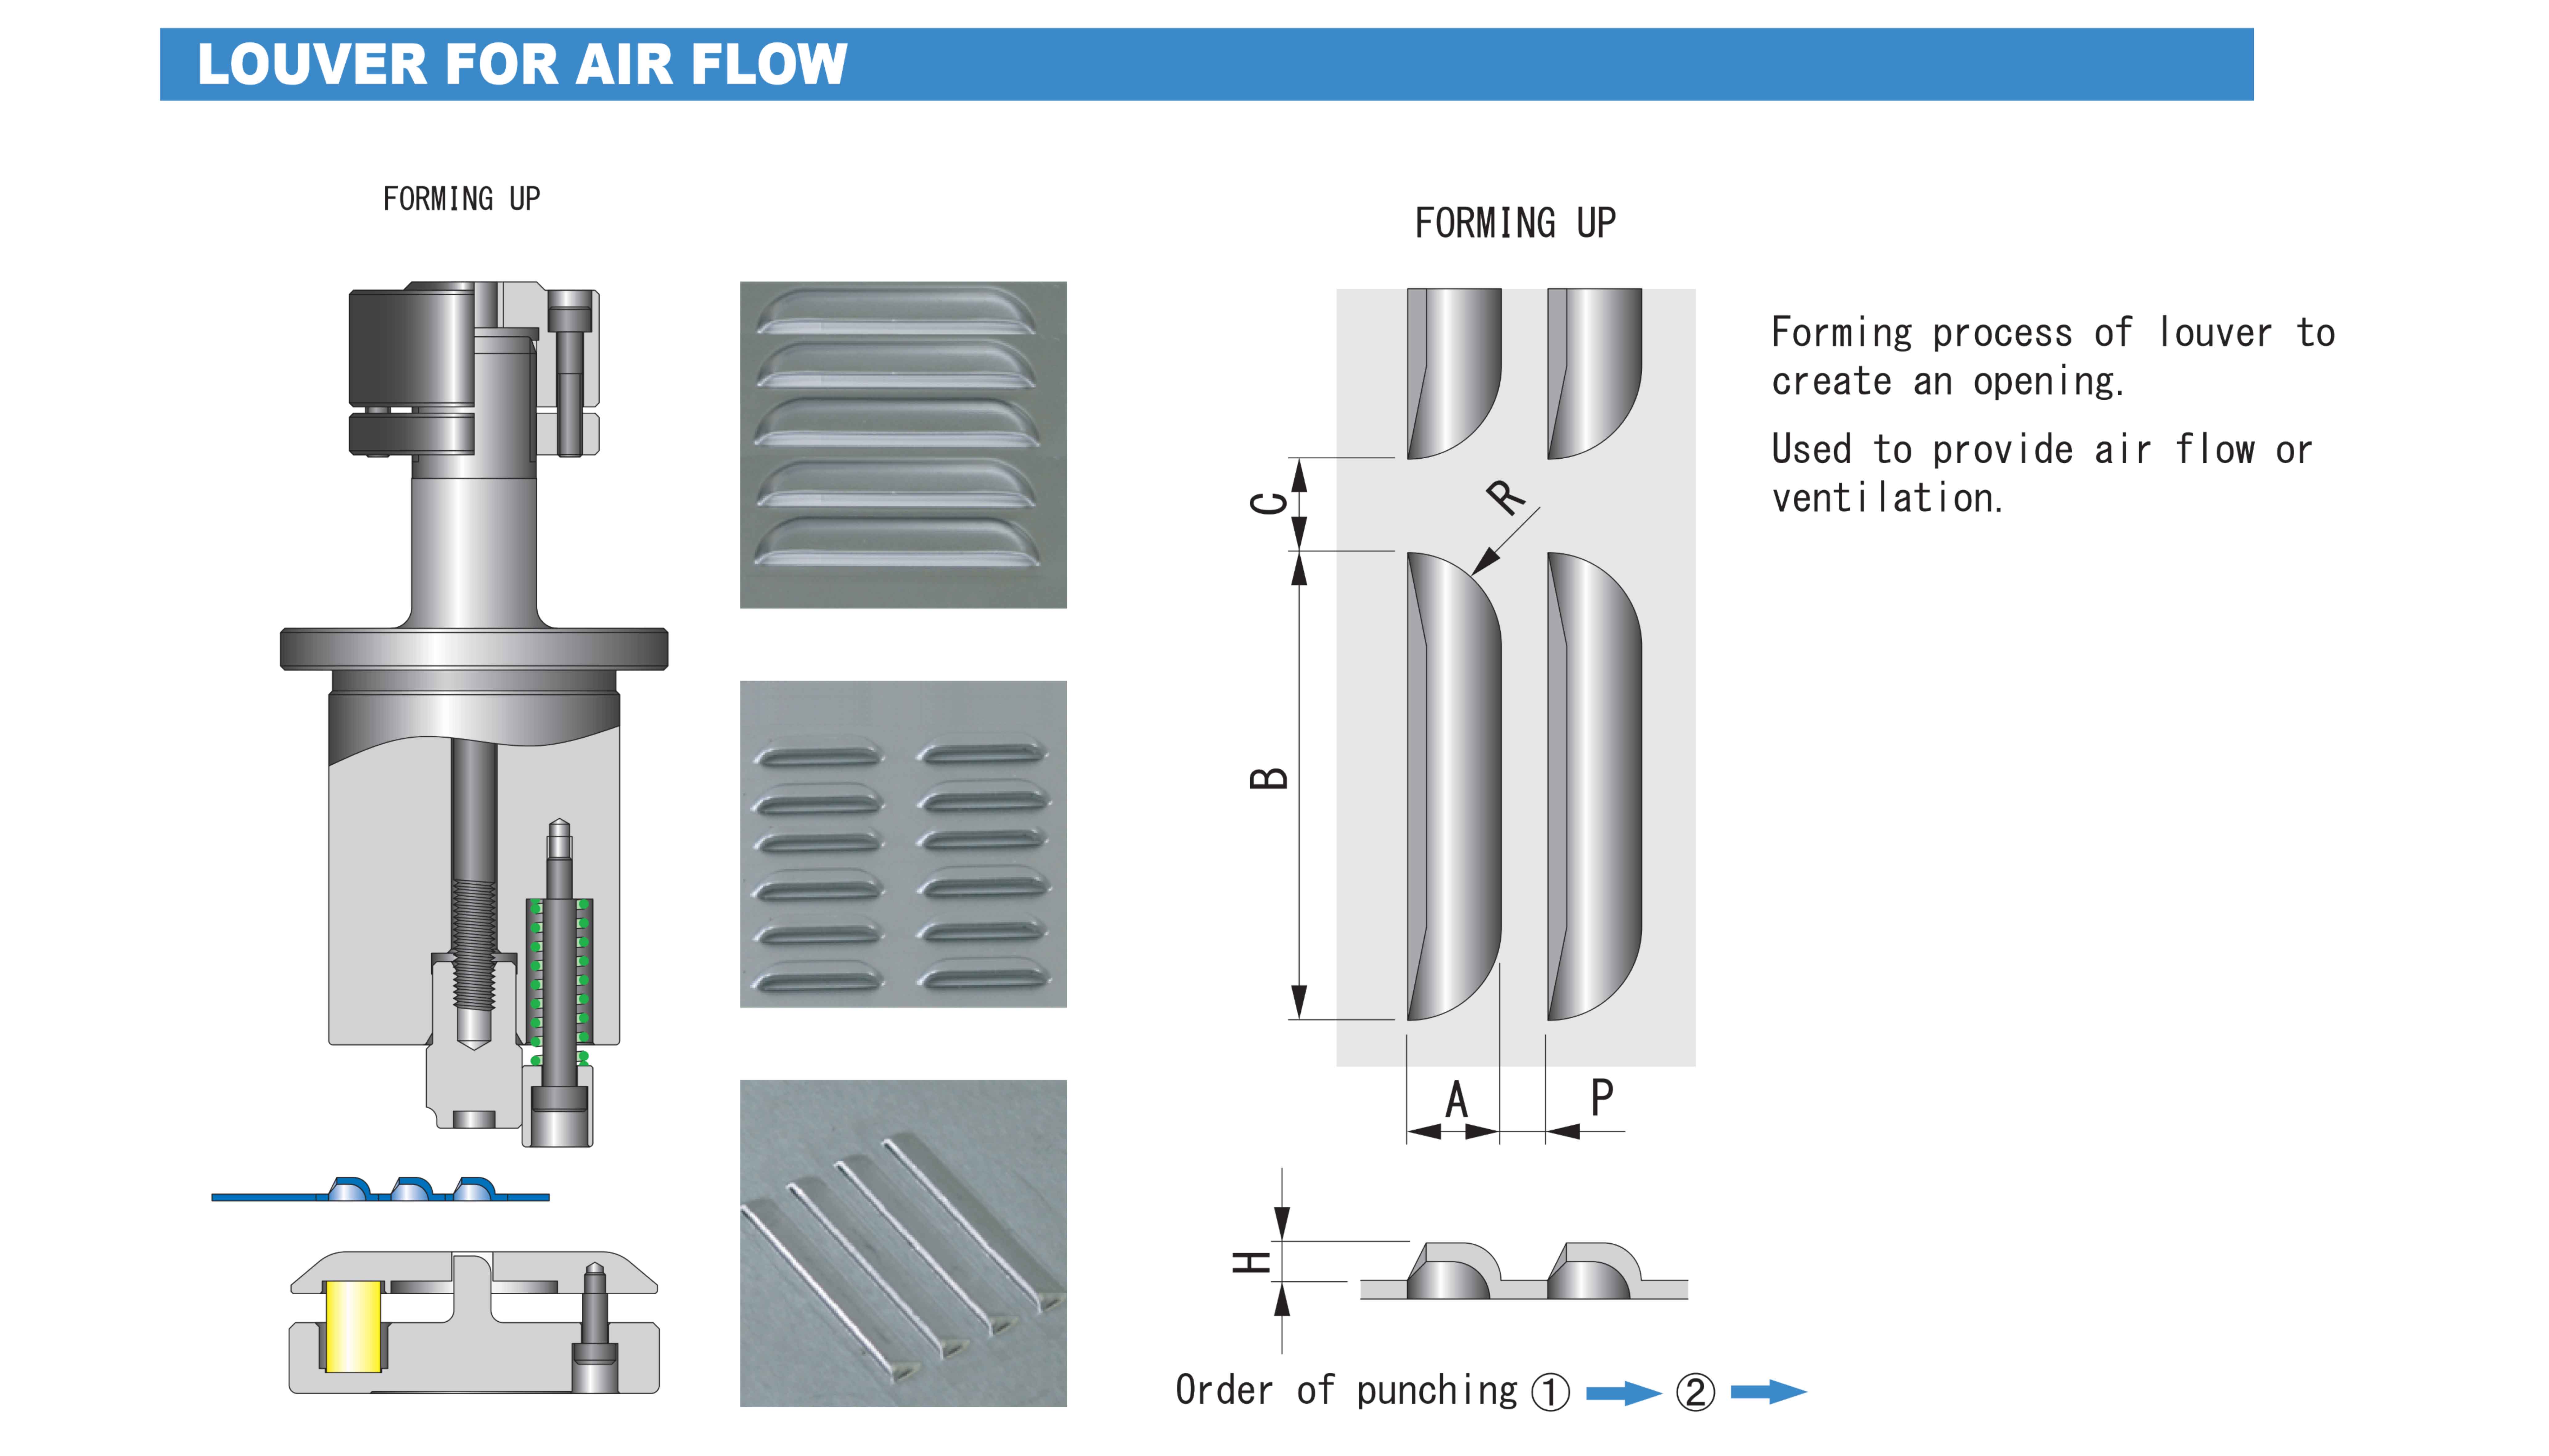 CONIC-FORMING-LOUVER-AIR-FLOW